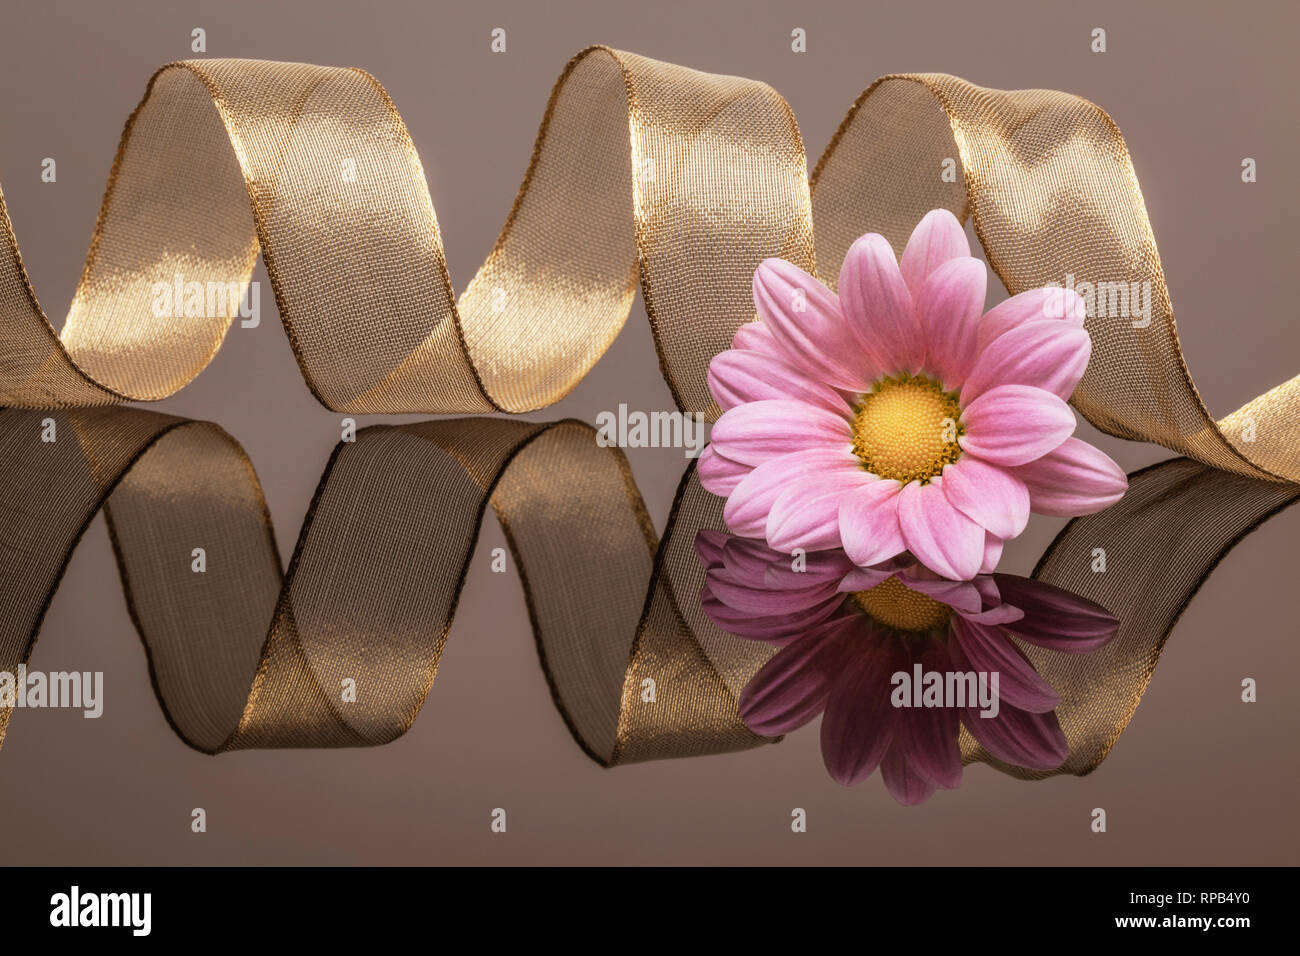 Gold ribbon and pink flowerhead on reflective surface Stock Photo